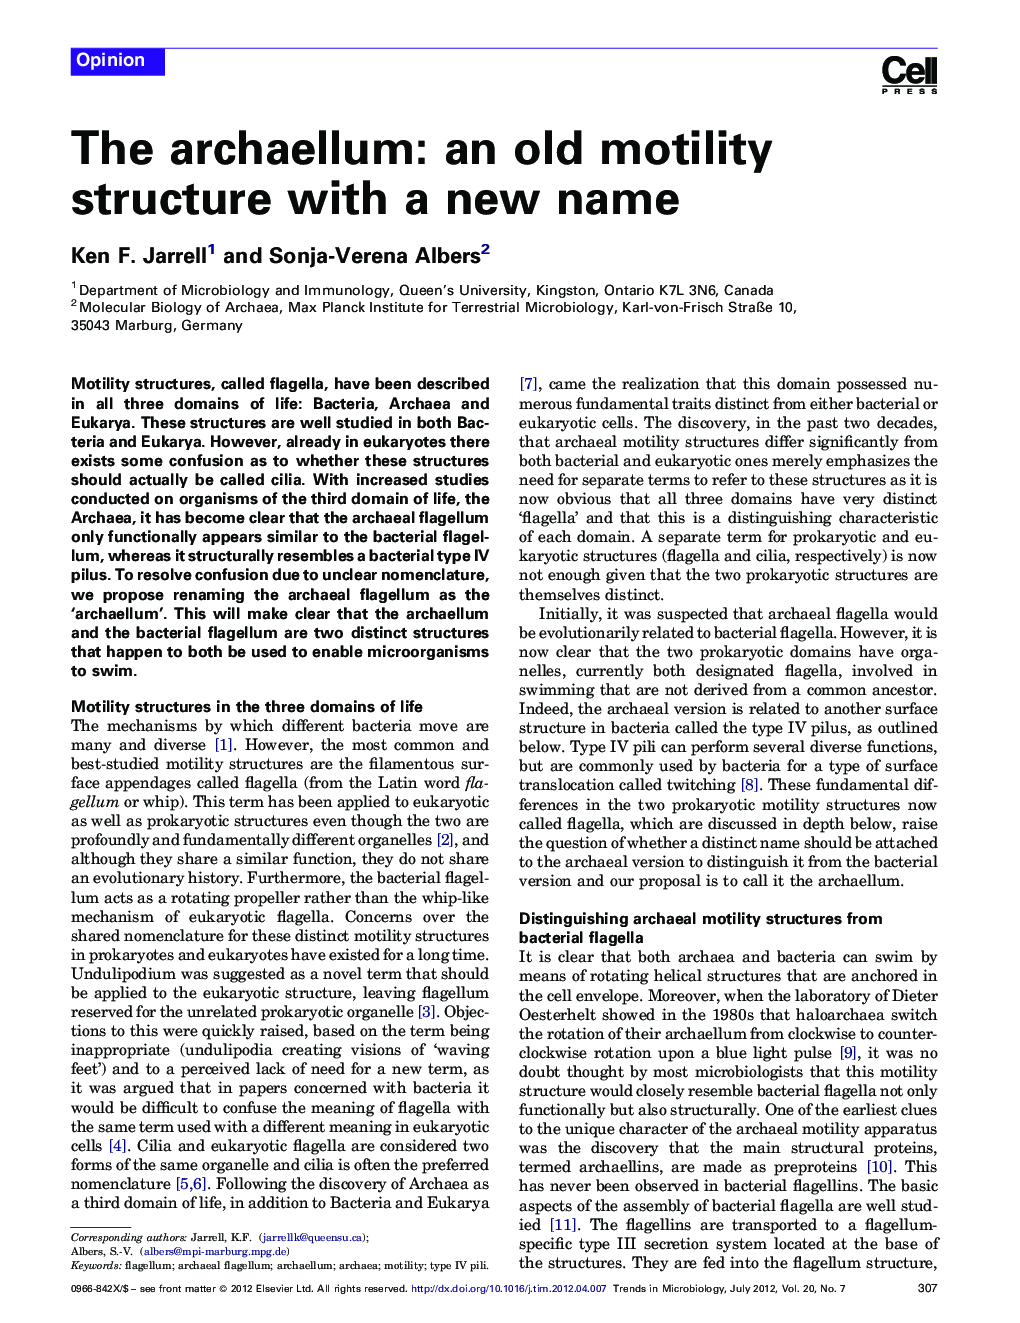 The archaellum: an old motility structure with a new name